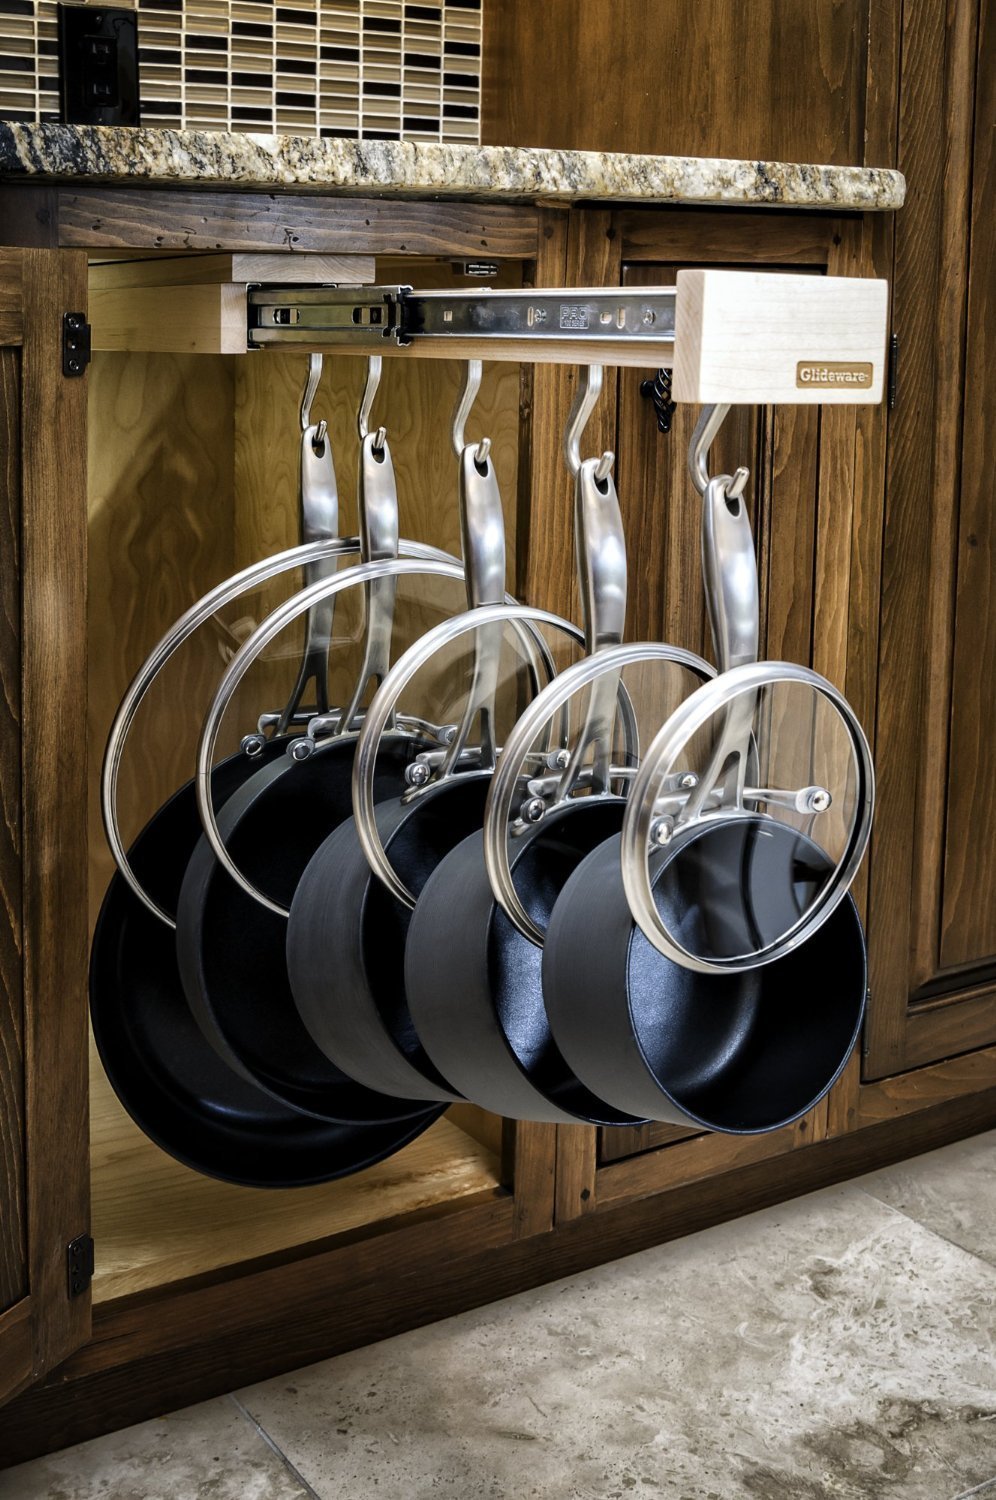 organizing pots and pans ideas & solutions